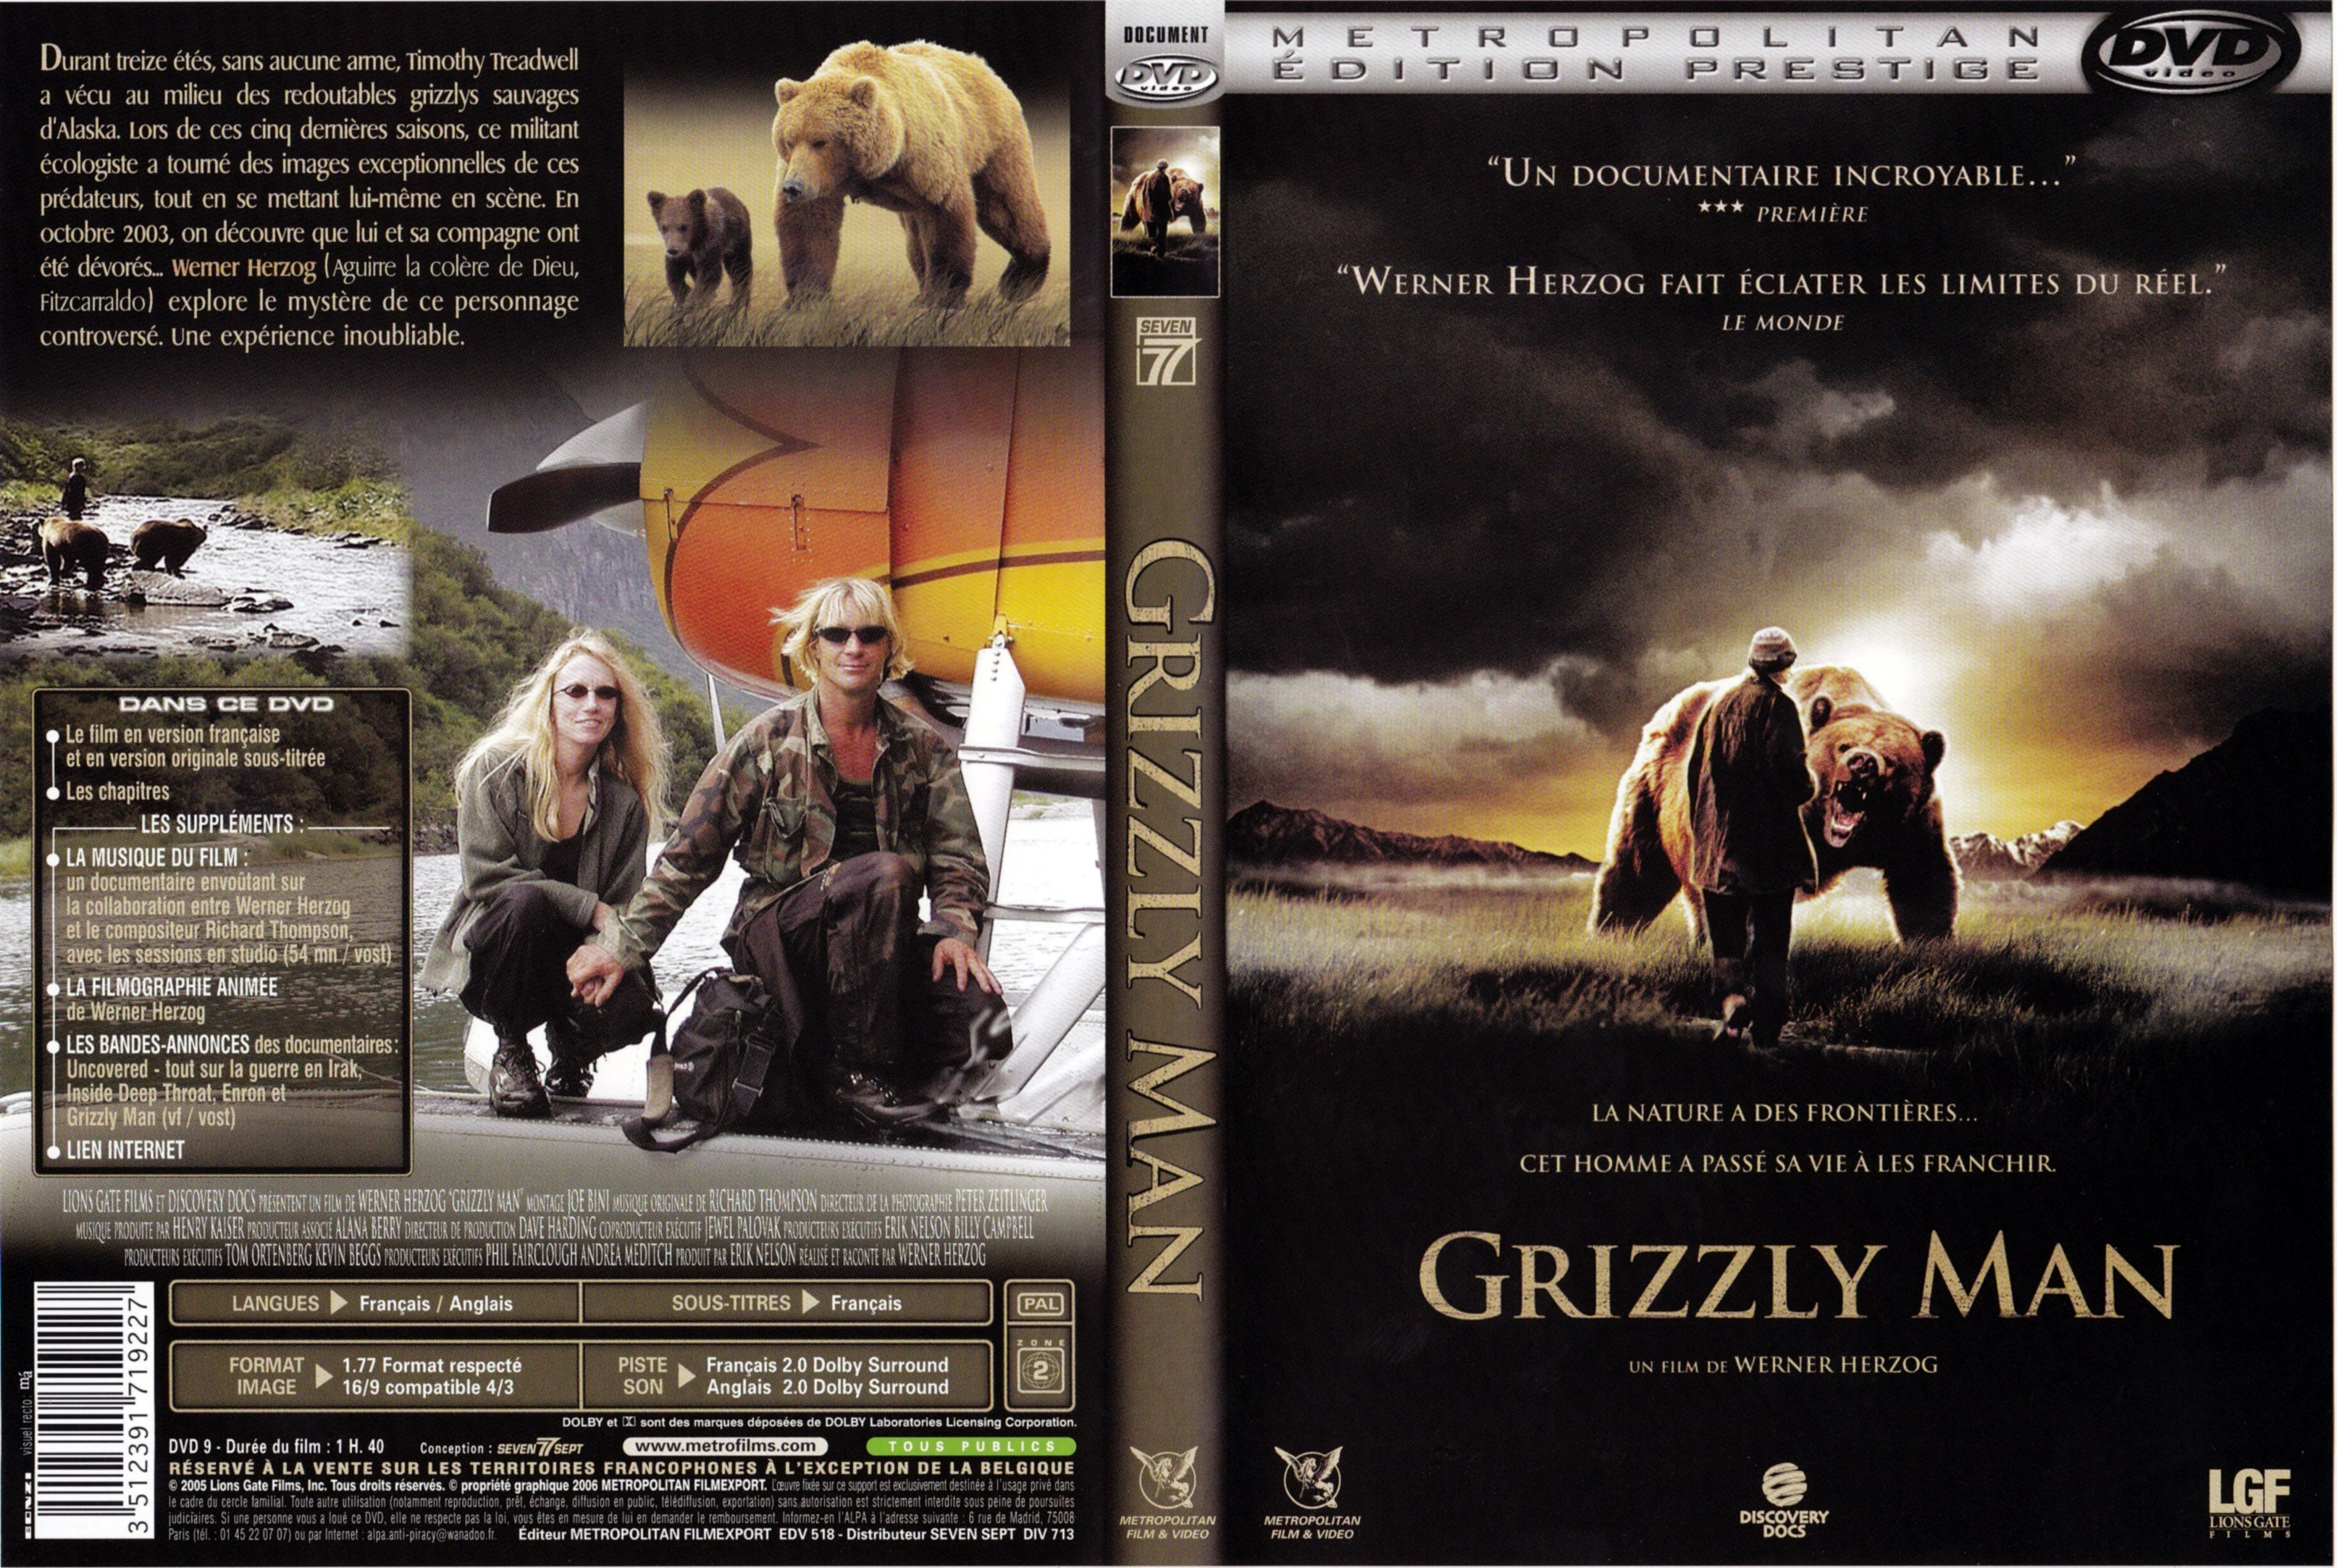 Jaquette DVD Grizzly Man